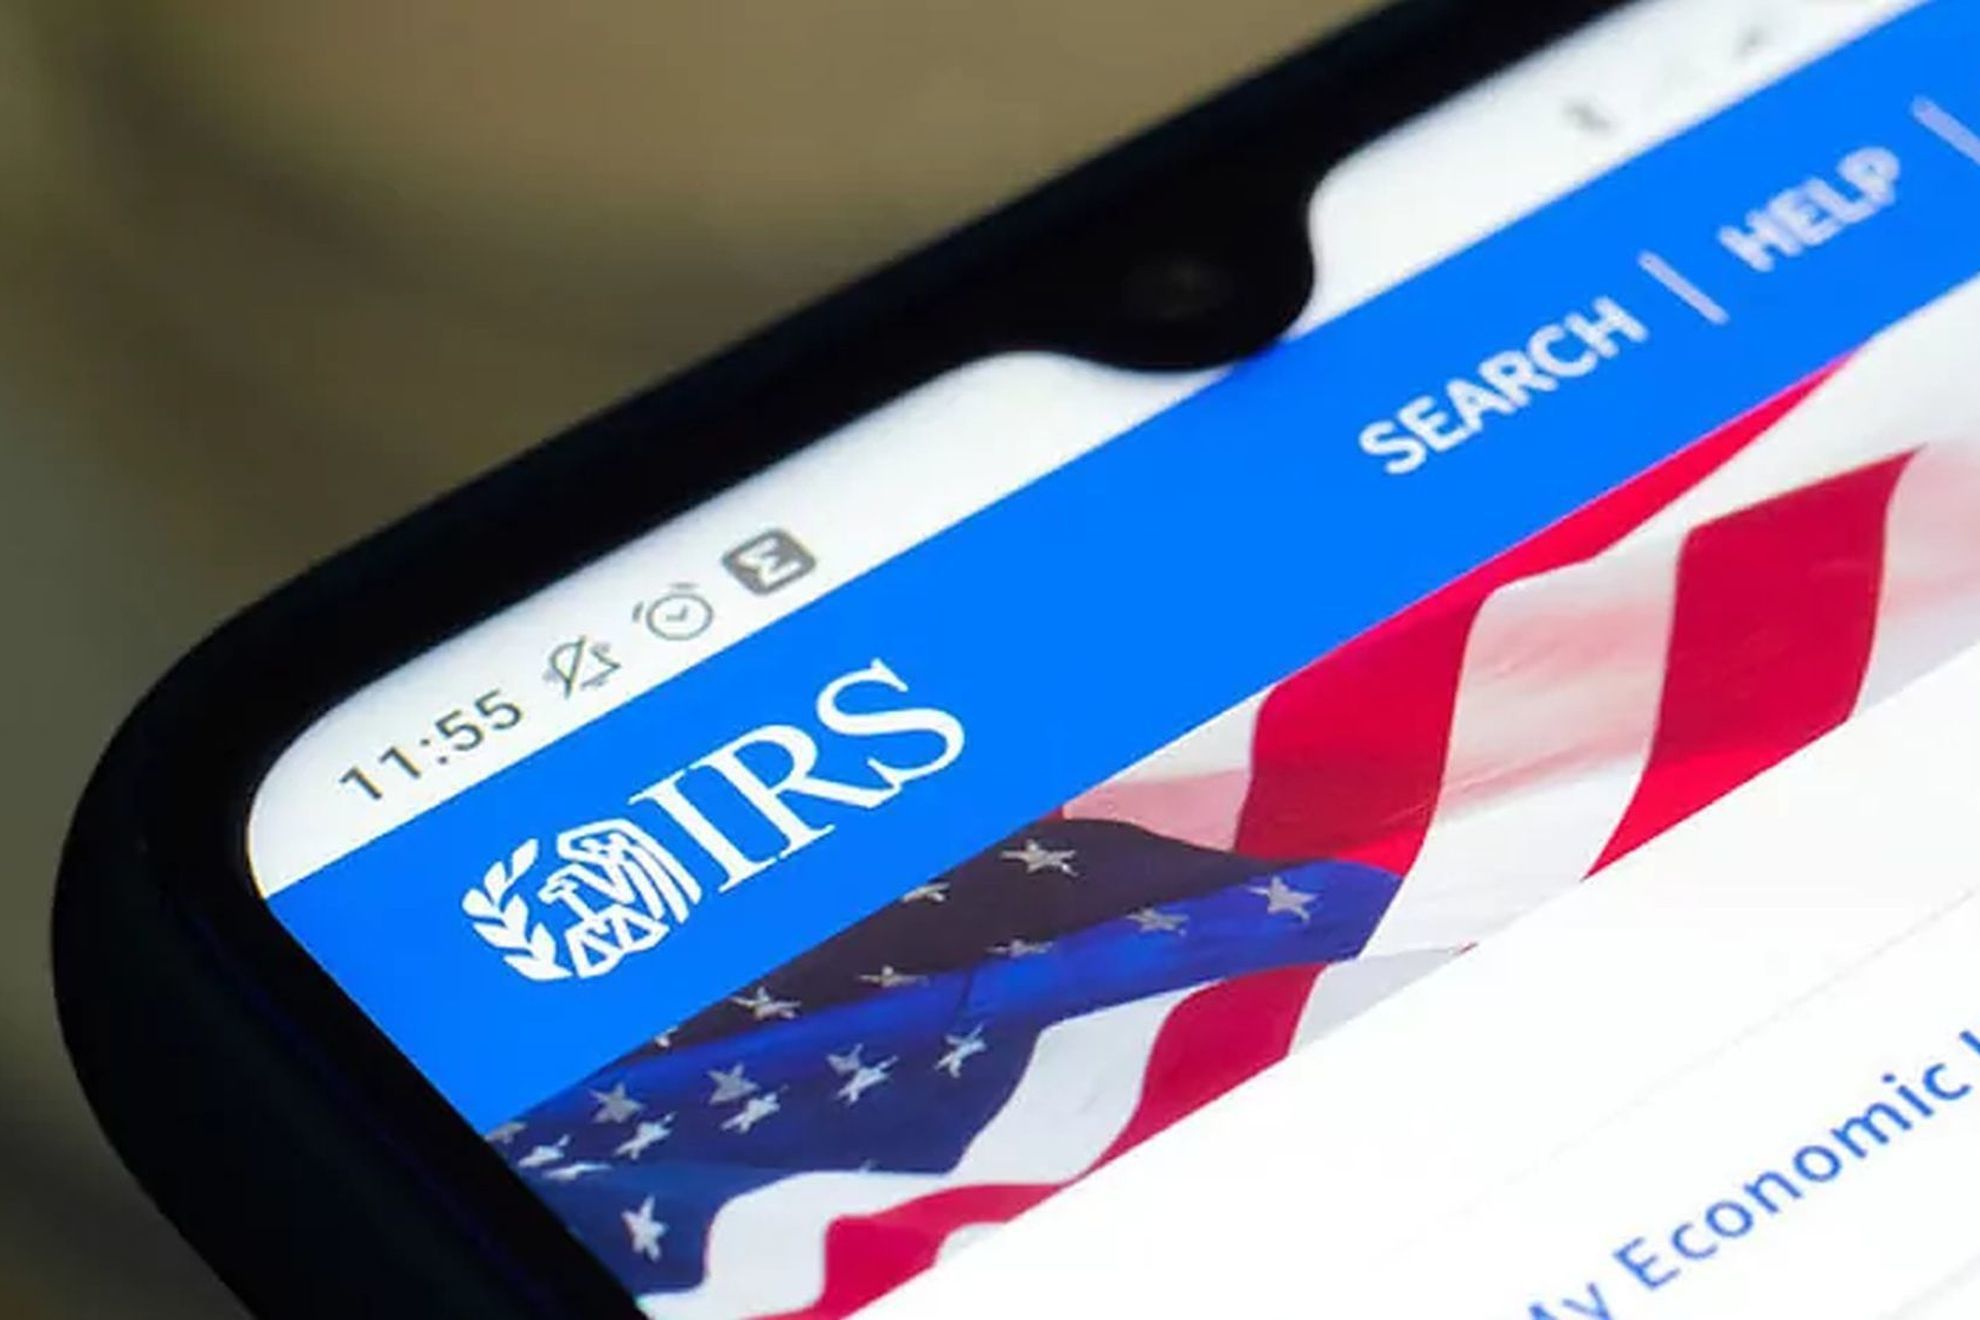 IRS Acceptance Date 2023: When will the IRS start processing electronic returns?